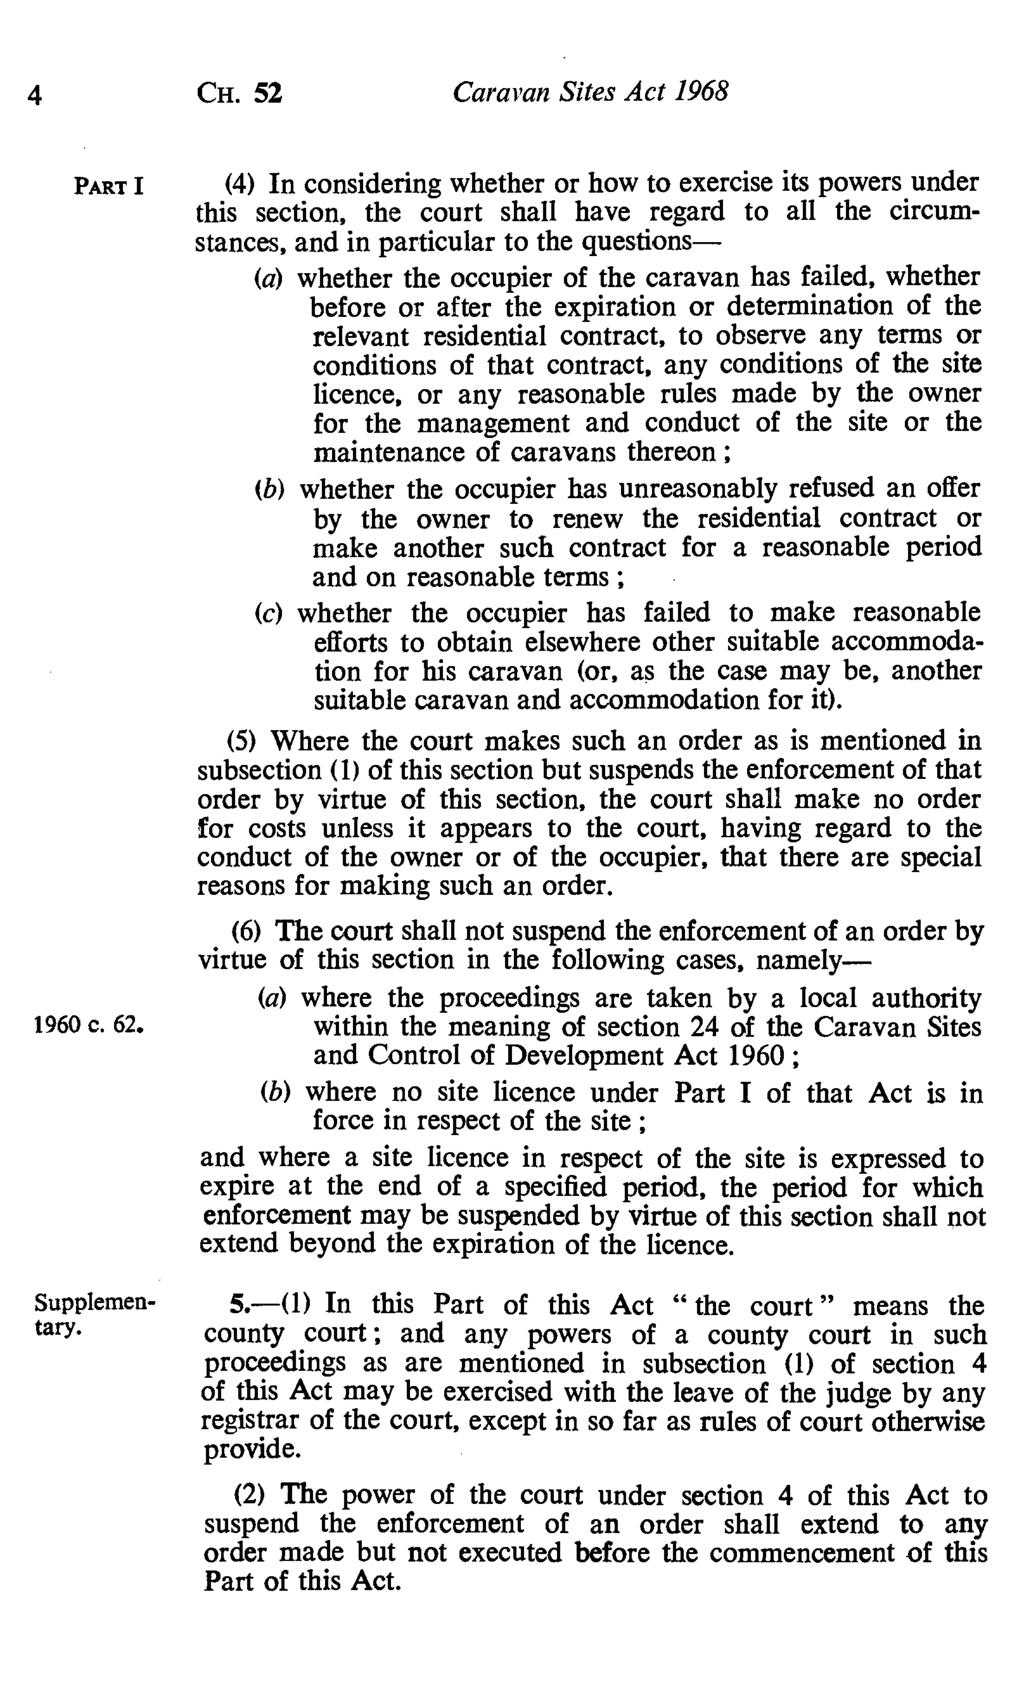 4 CH. 52 Caravan Sites Act 1968 PART I (4) In considering whether or how to exercise its powers under this section, the court shall have regard to all the circumstances, and in particular to the